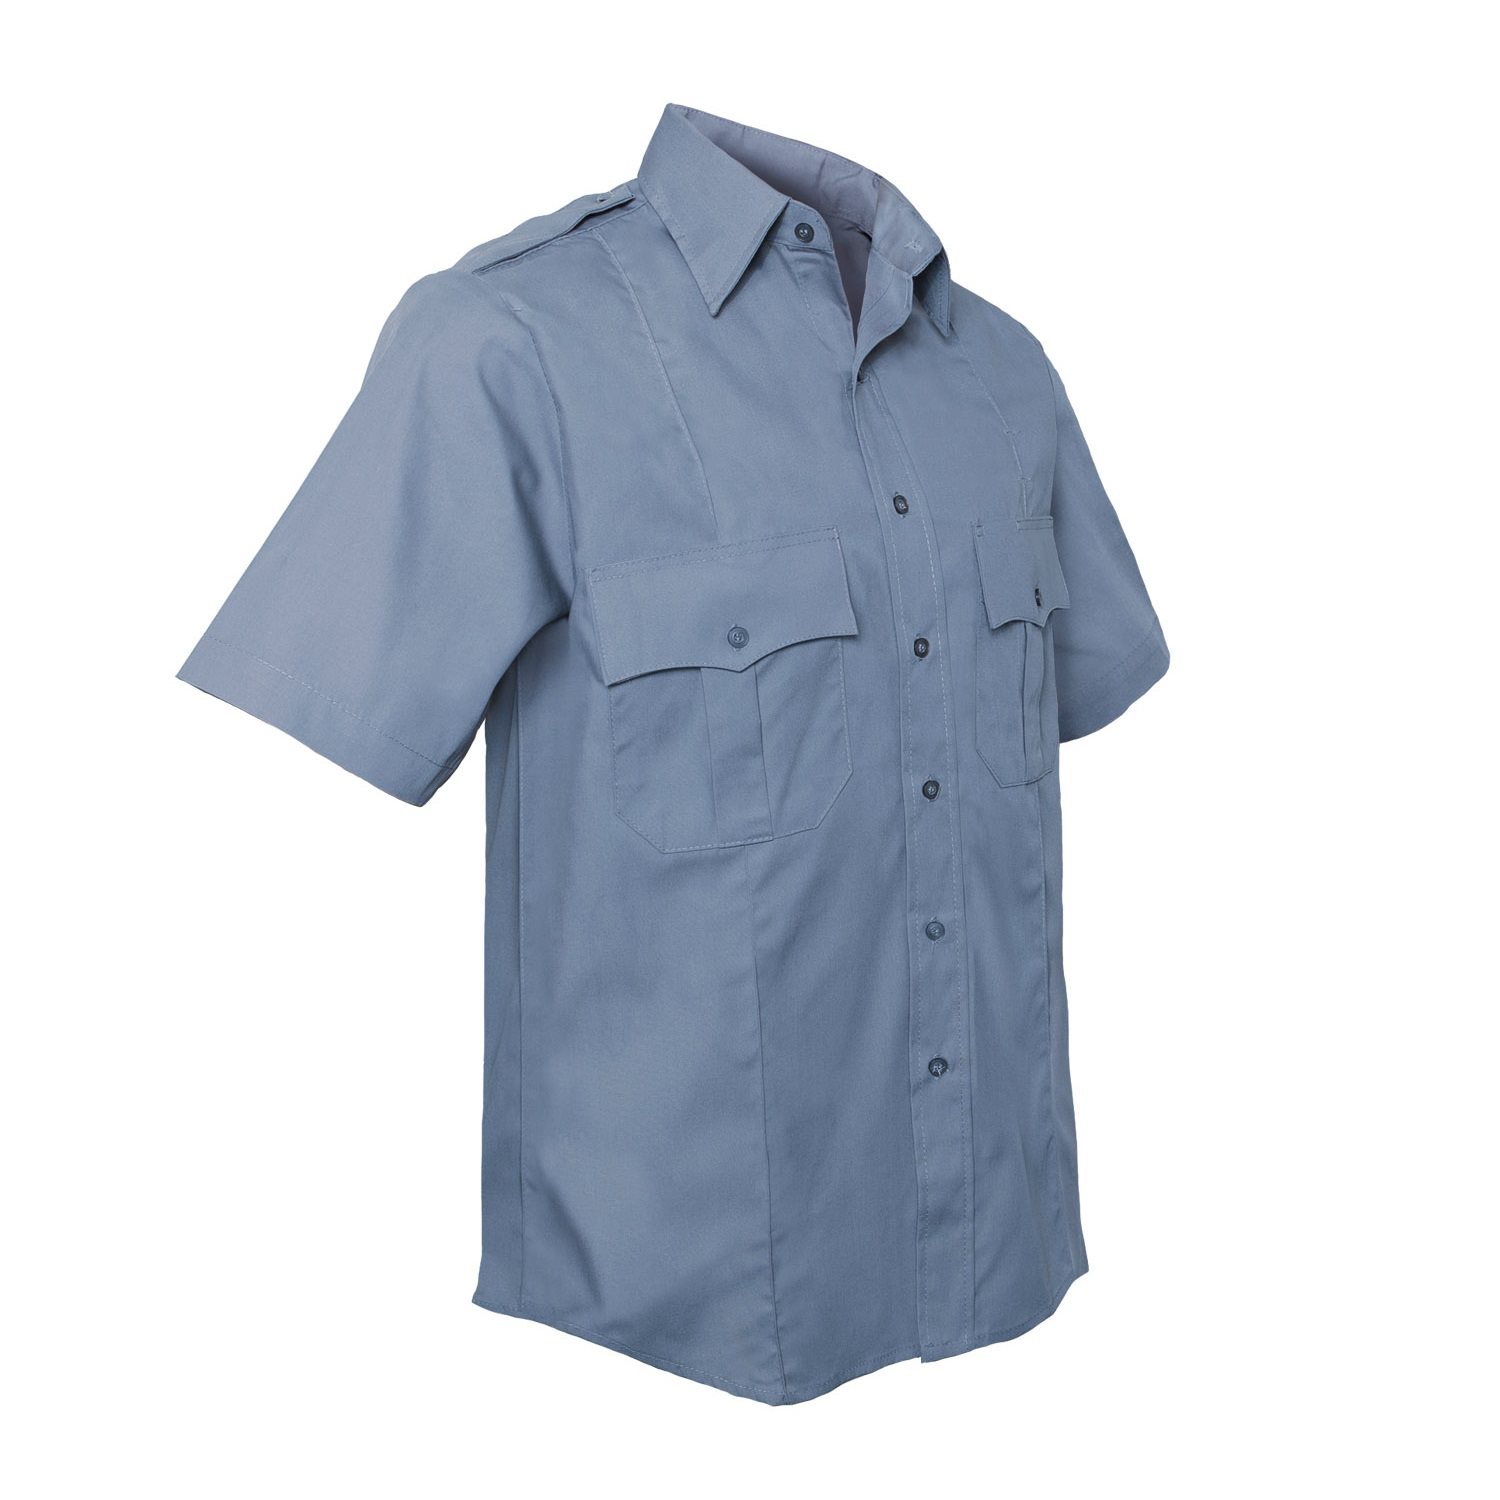 POLICE AND SECURITY shirt short sleeve light blue ROTHCO 30025 L-11